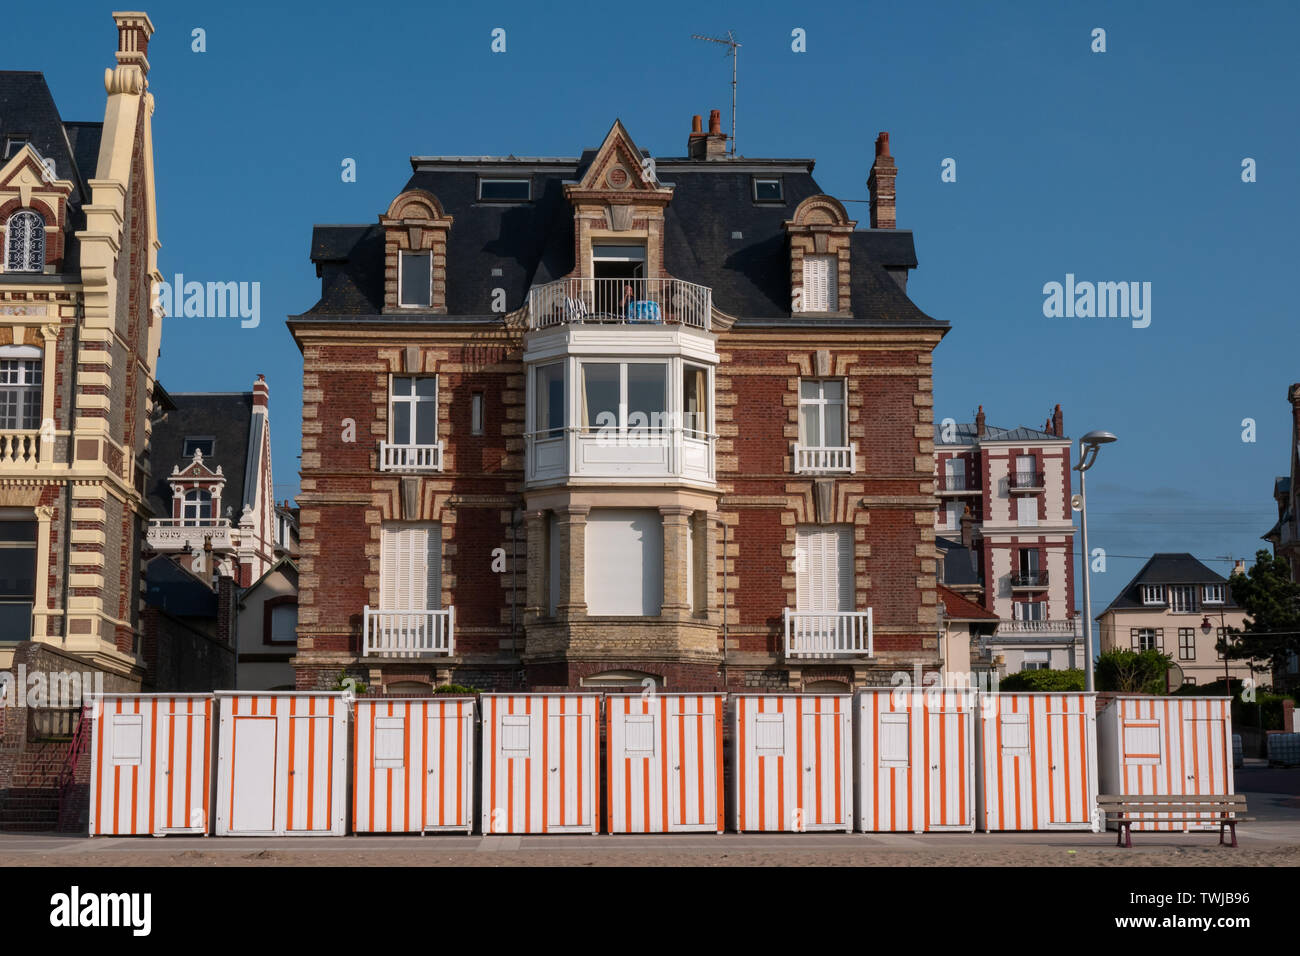 Typical houses and beach cabins of Houlgate, Normandy, France Stock Photo